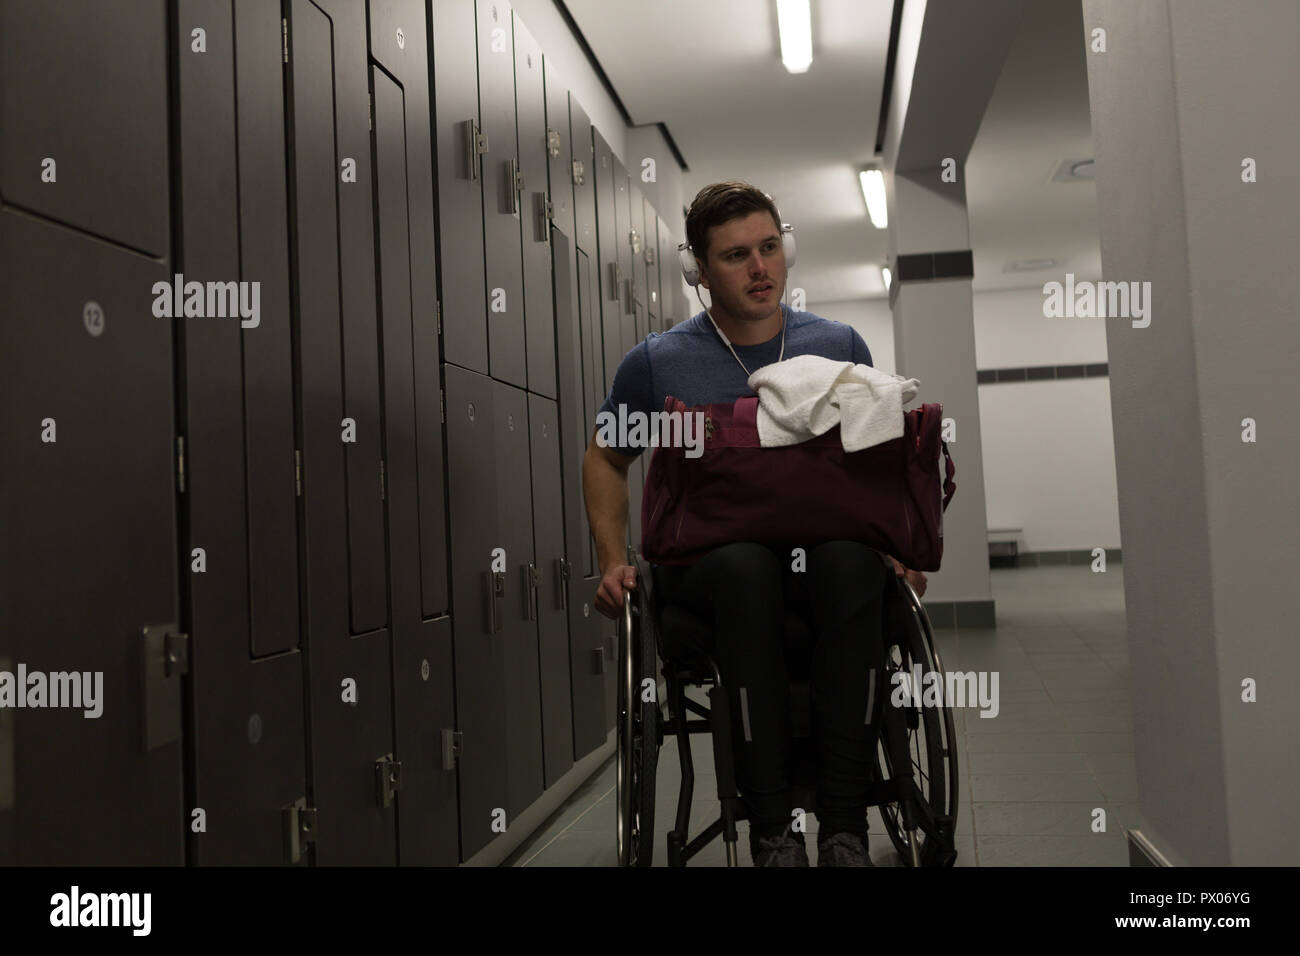 Disabled man with his bag in locker room Stock Photo